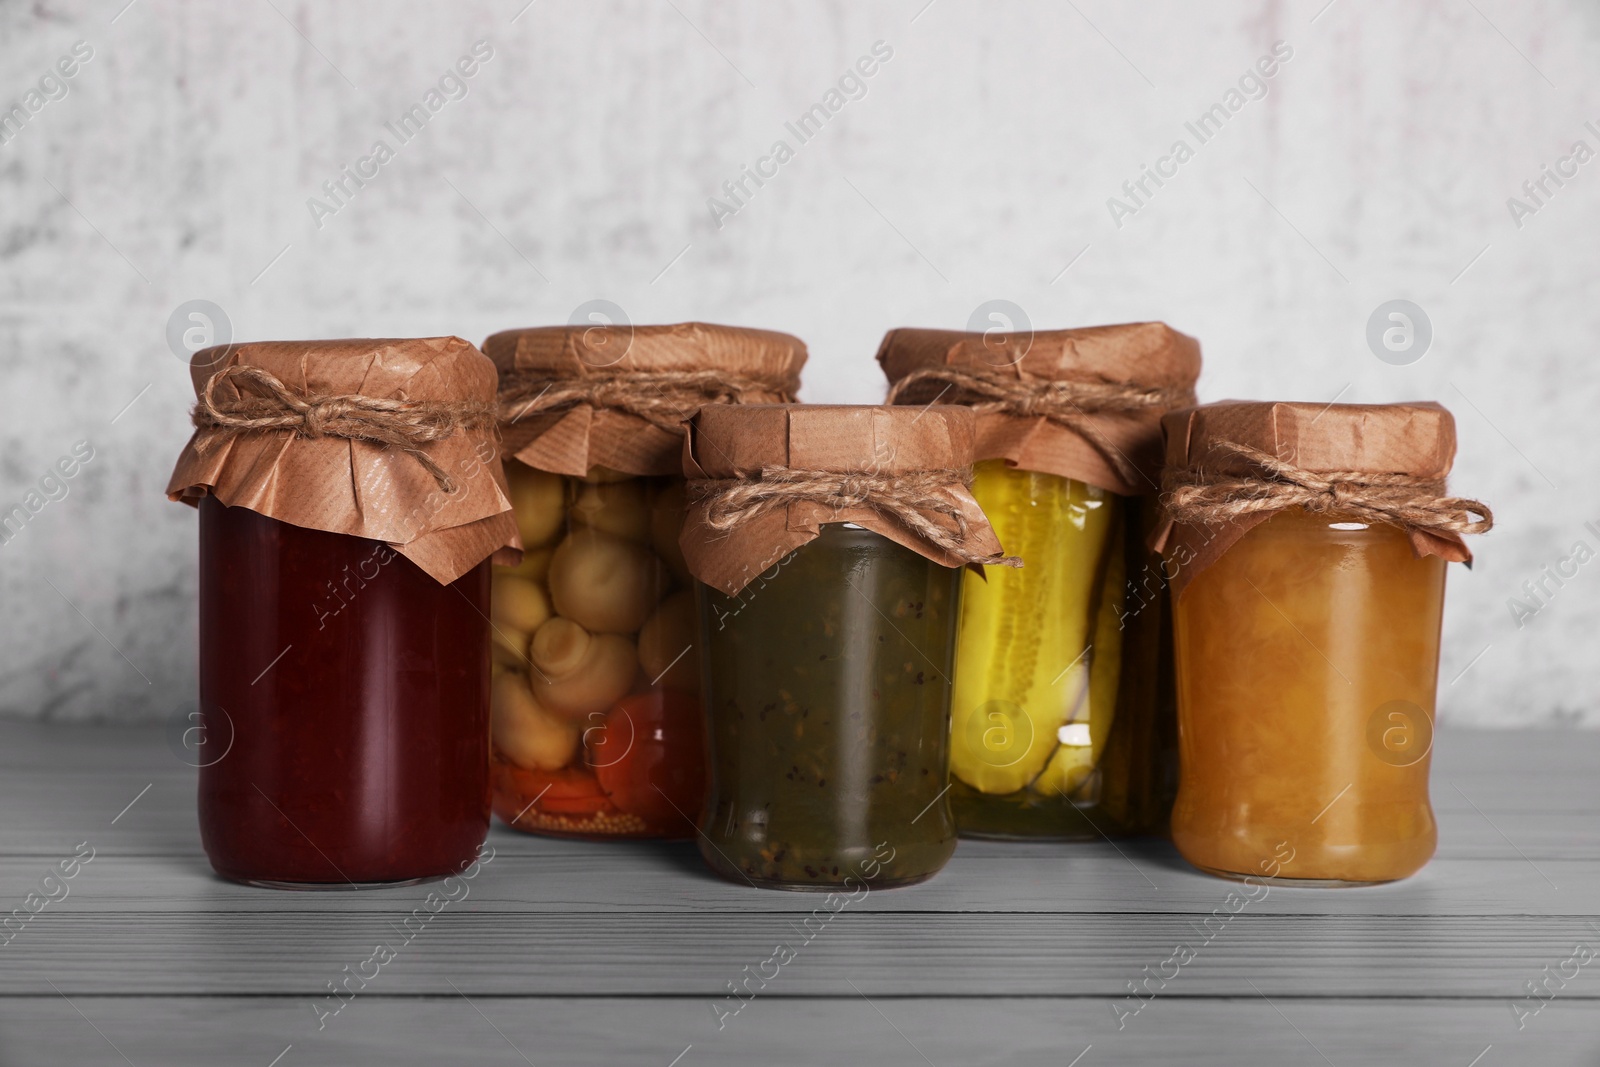 Photo of Many glass jars with different preserved products on wooden table